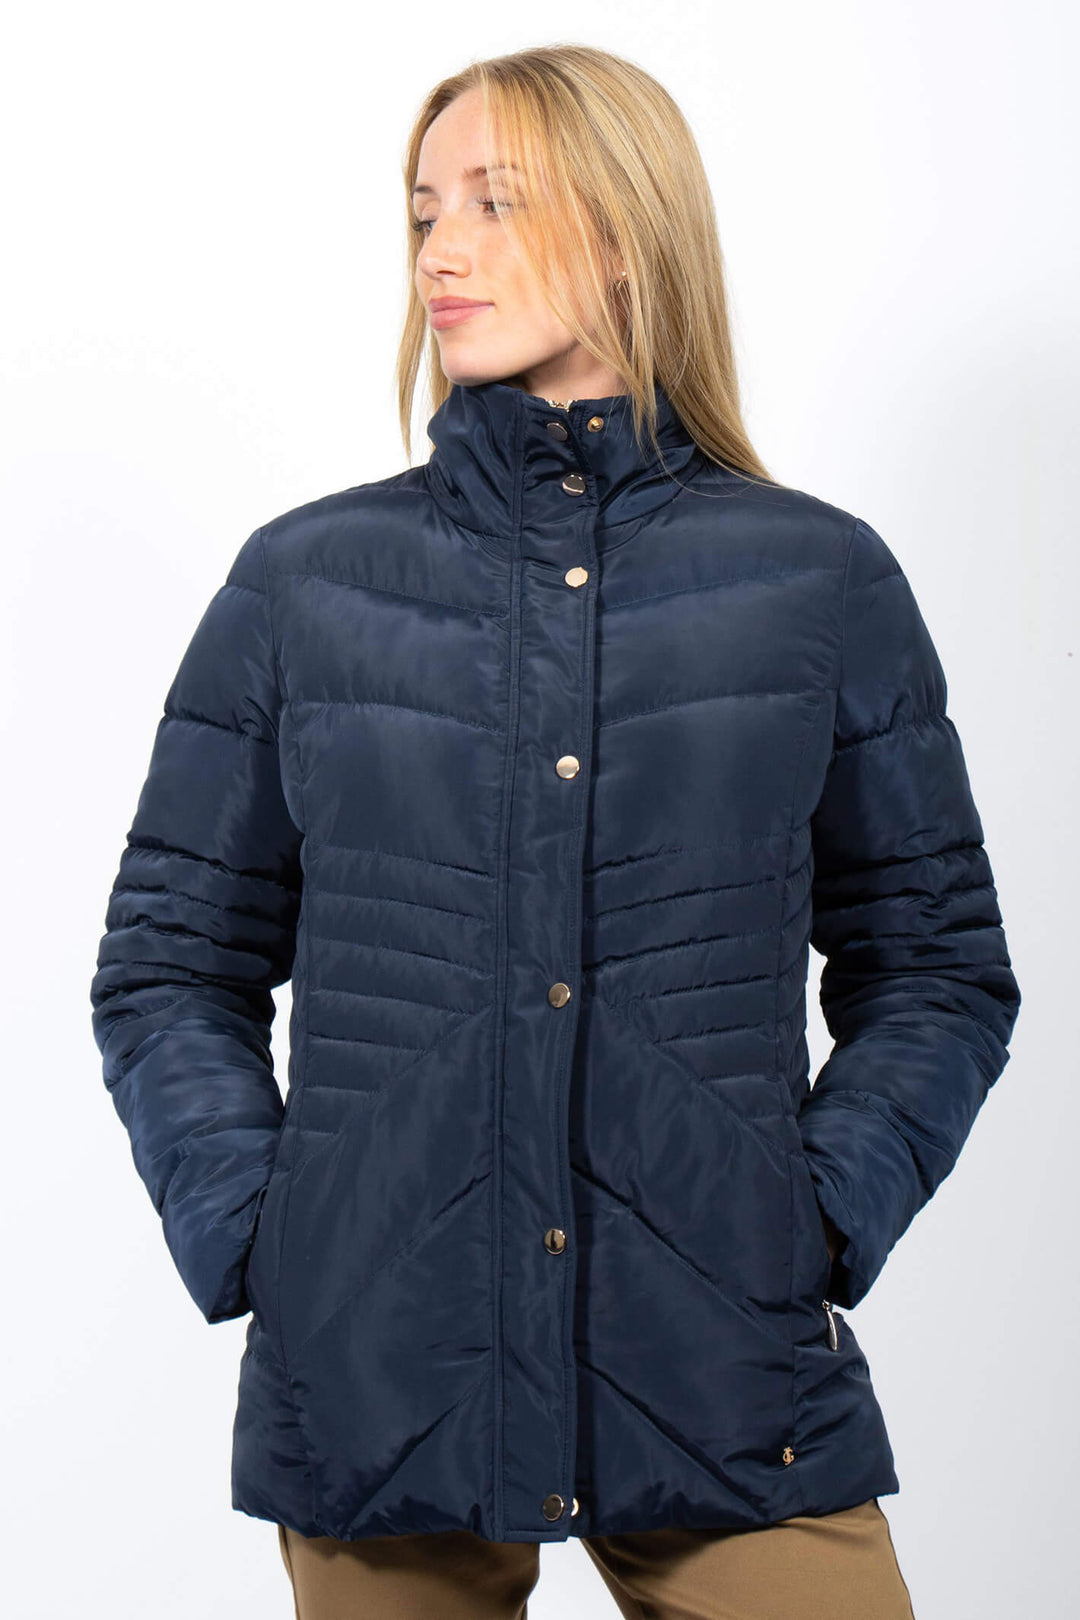 Jessica Graff 26019 Navy Quilted Short Coat - Experience Boutique